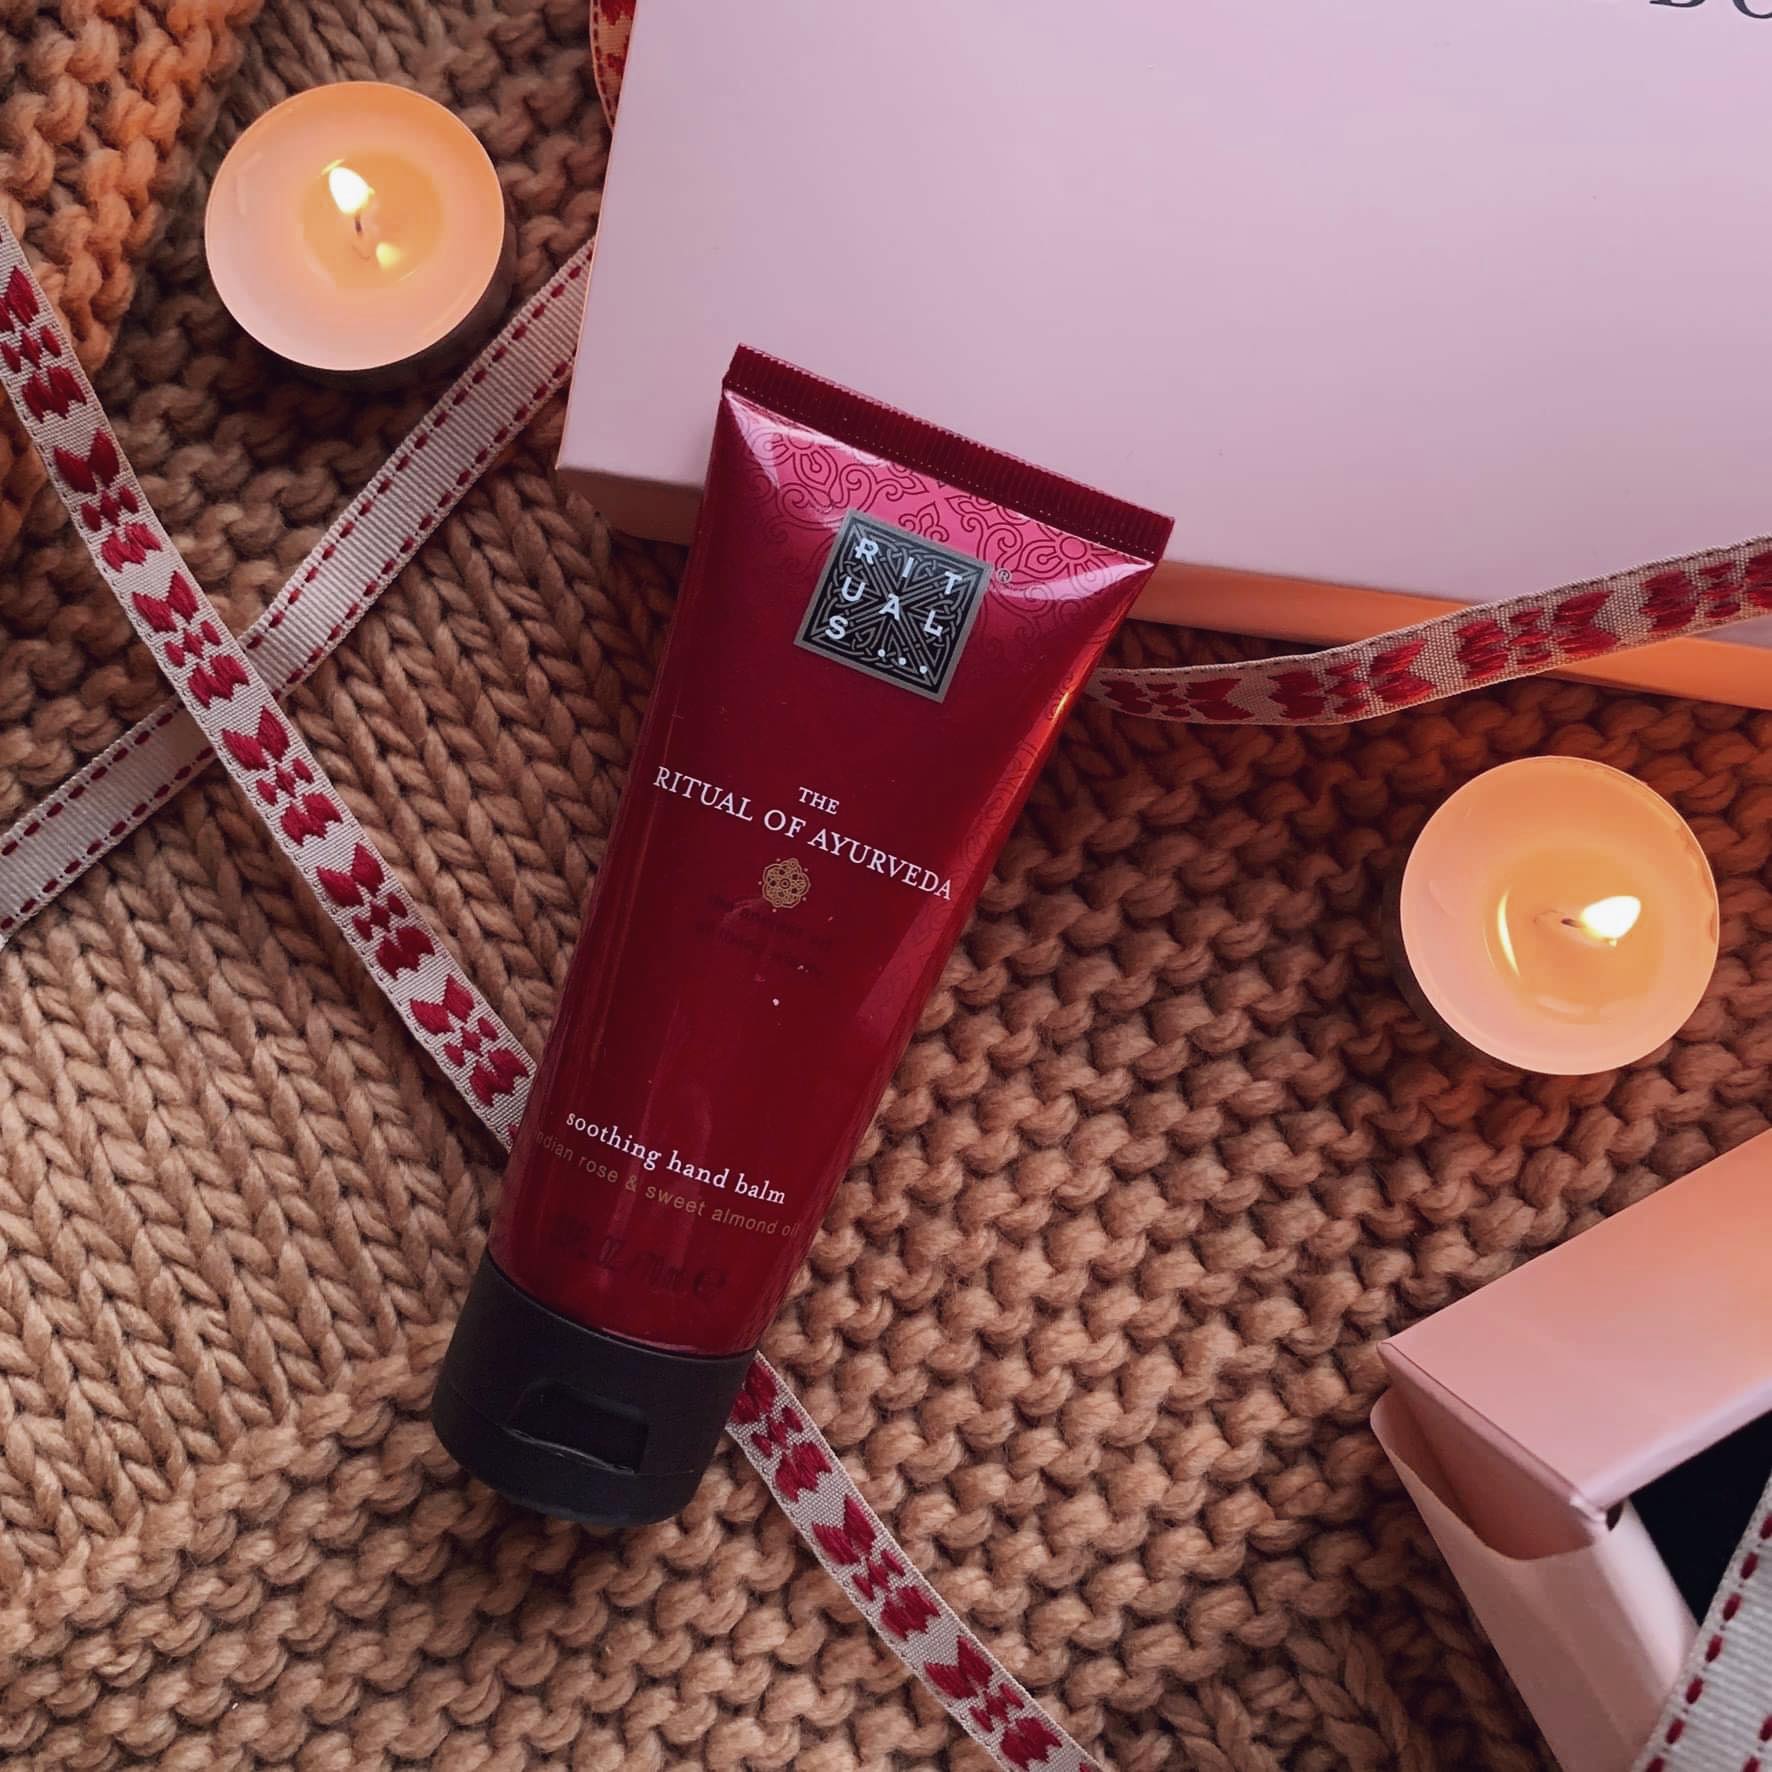 Rituals The Ritual of Ayurveda Hand Balm- November 2019 Glossybox Review - Miss Boux